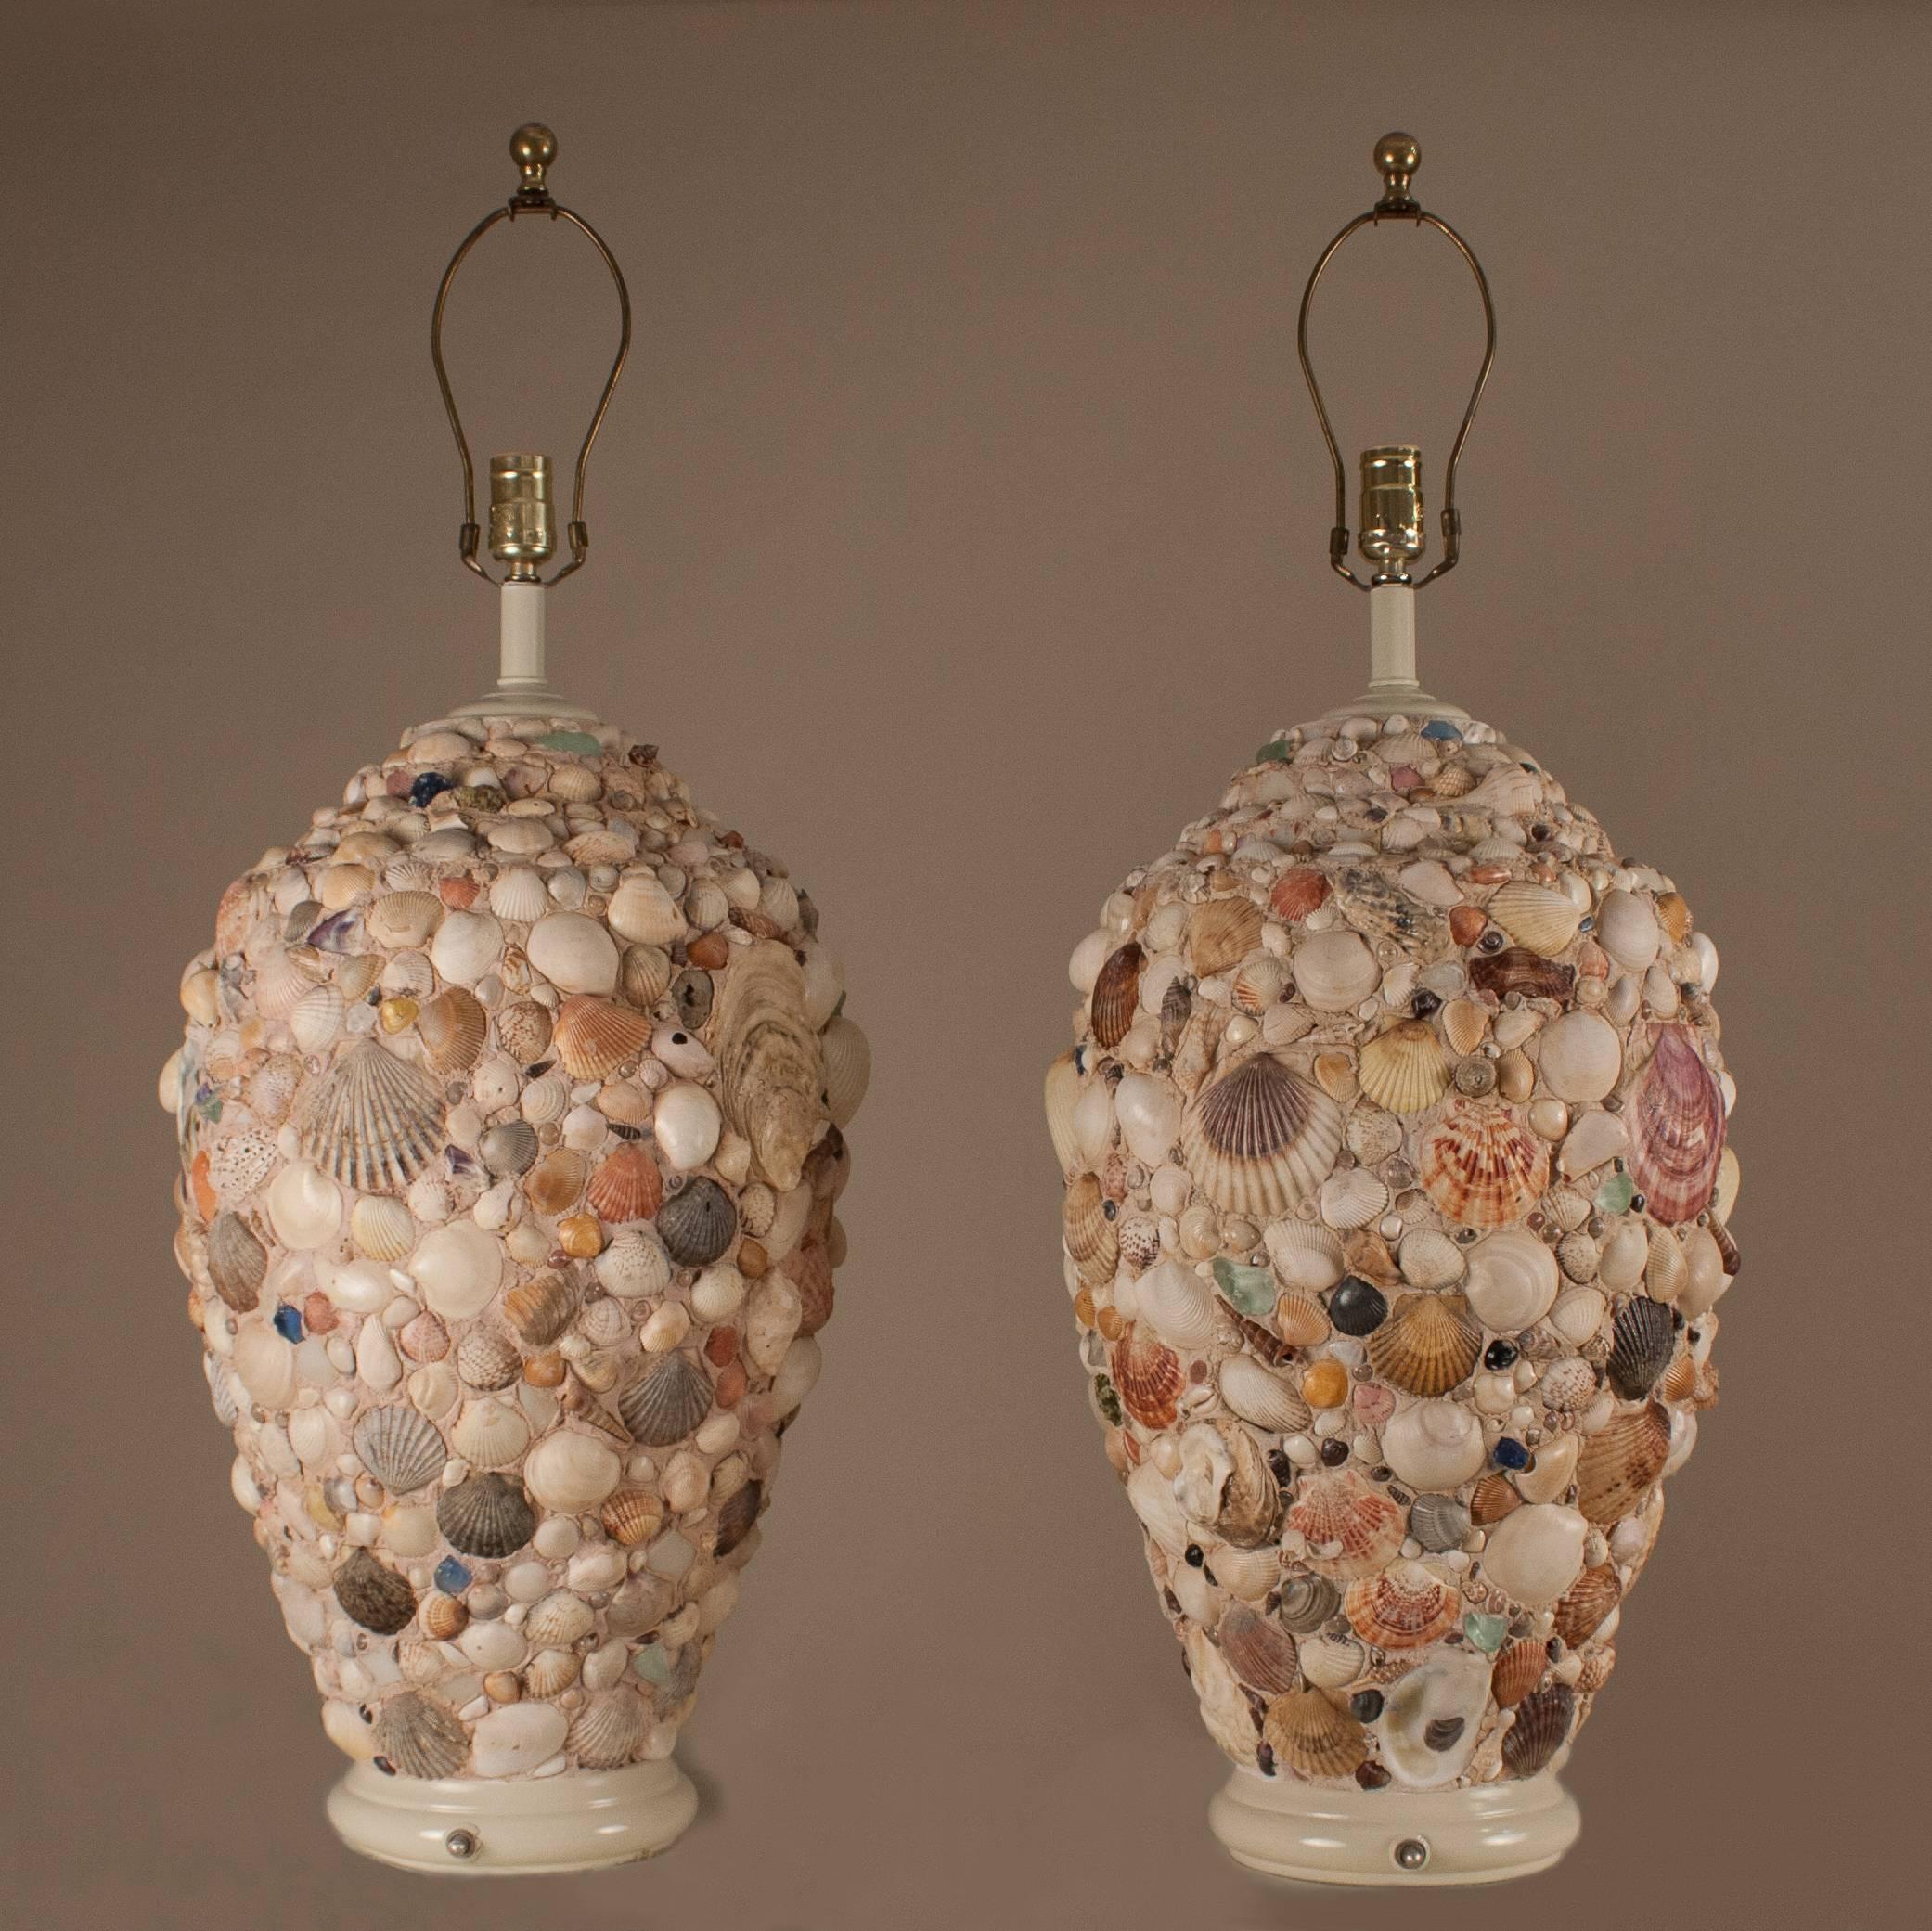 A pleasing palette of seashells and green and blue sea glass adorn these positively coastal 1960s table lamps. The lamps stand tall at 27.5 inches from the painted wooden base to socket top, 34 inches to the top of the brass finial. The diameter (at